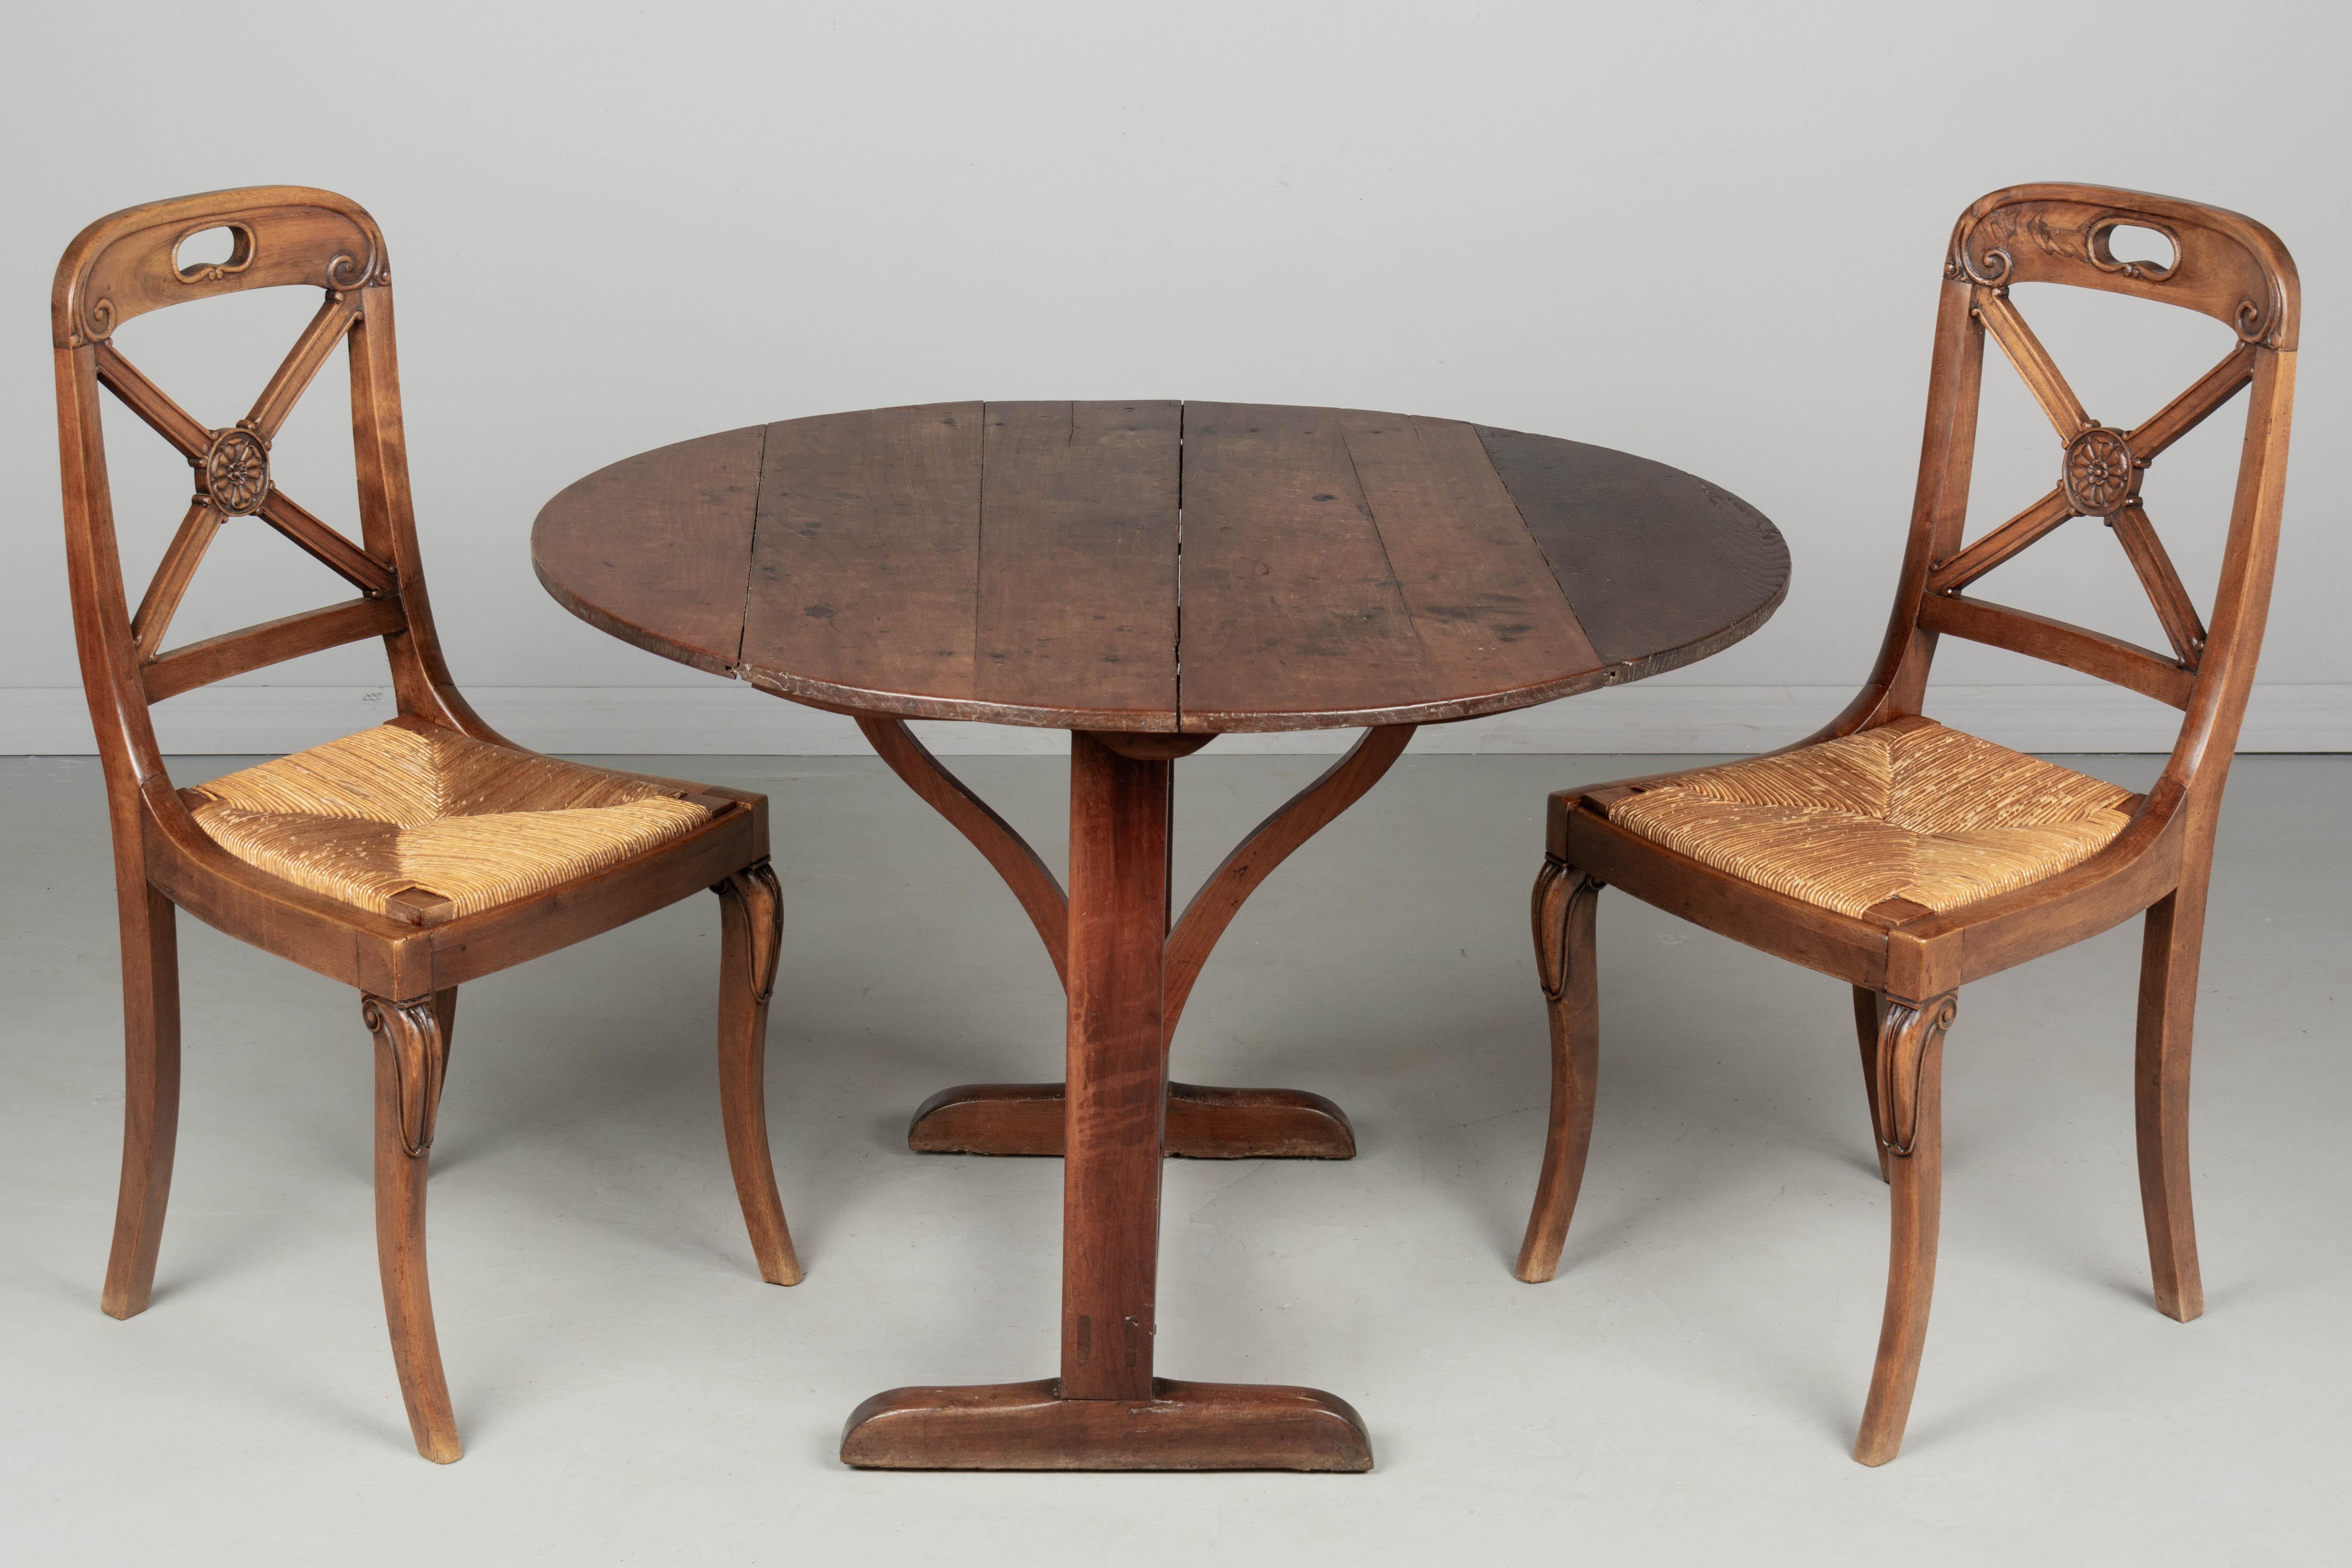 Country 19th Century French Wine Tasting Table or Tilt-Top Table